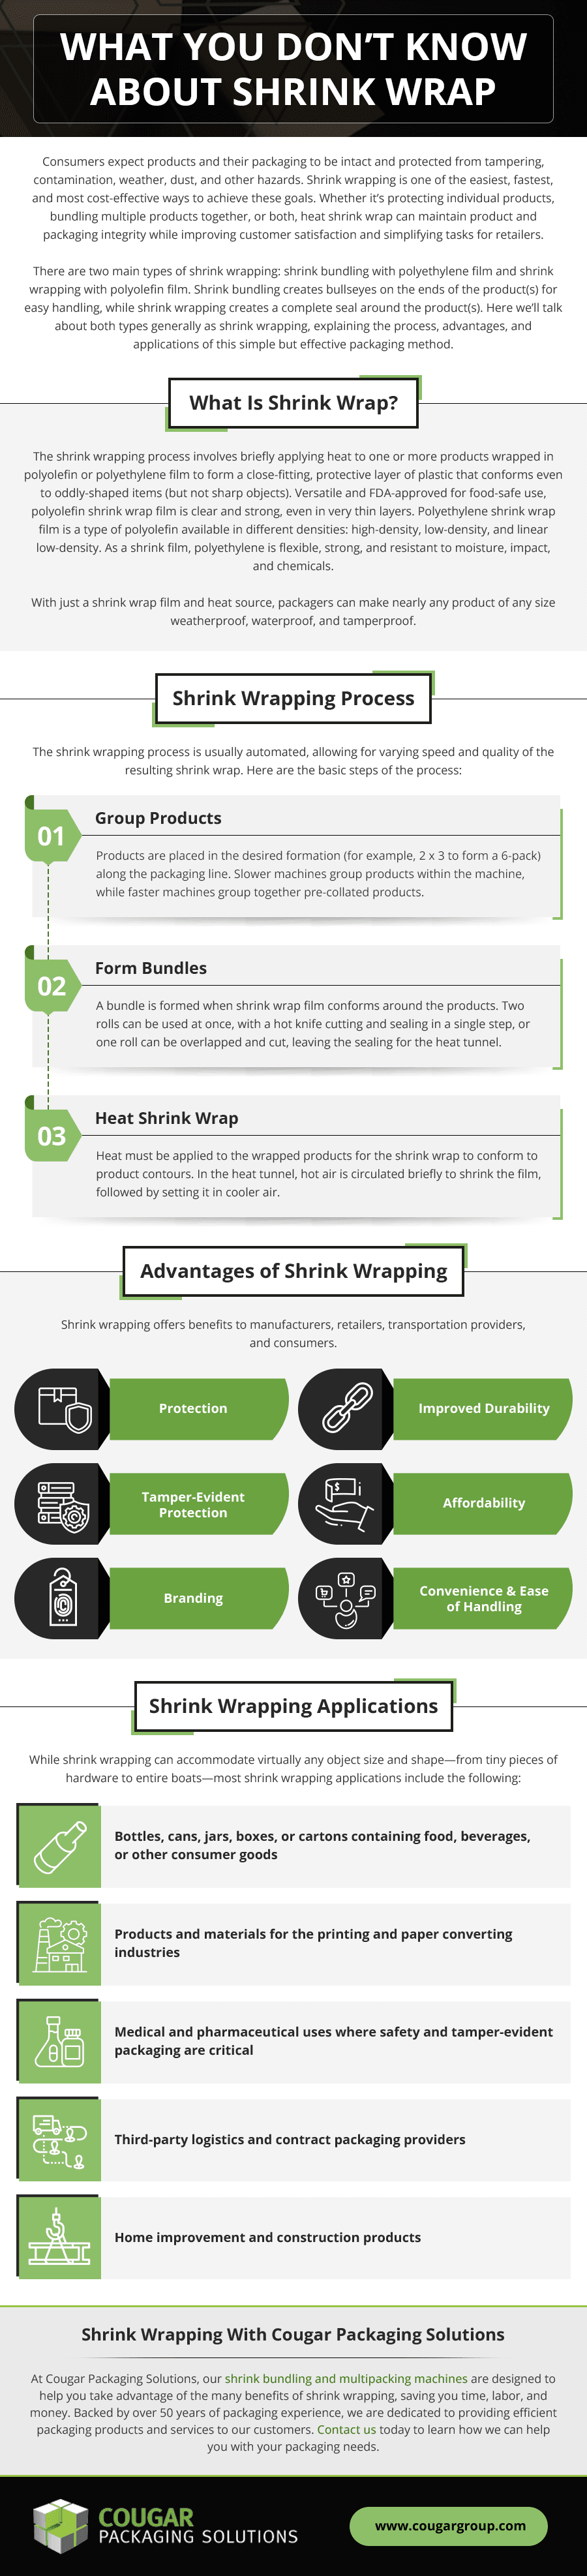 About Shrink Wrap